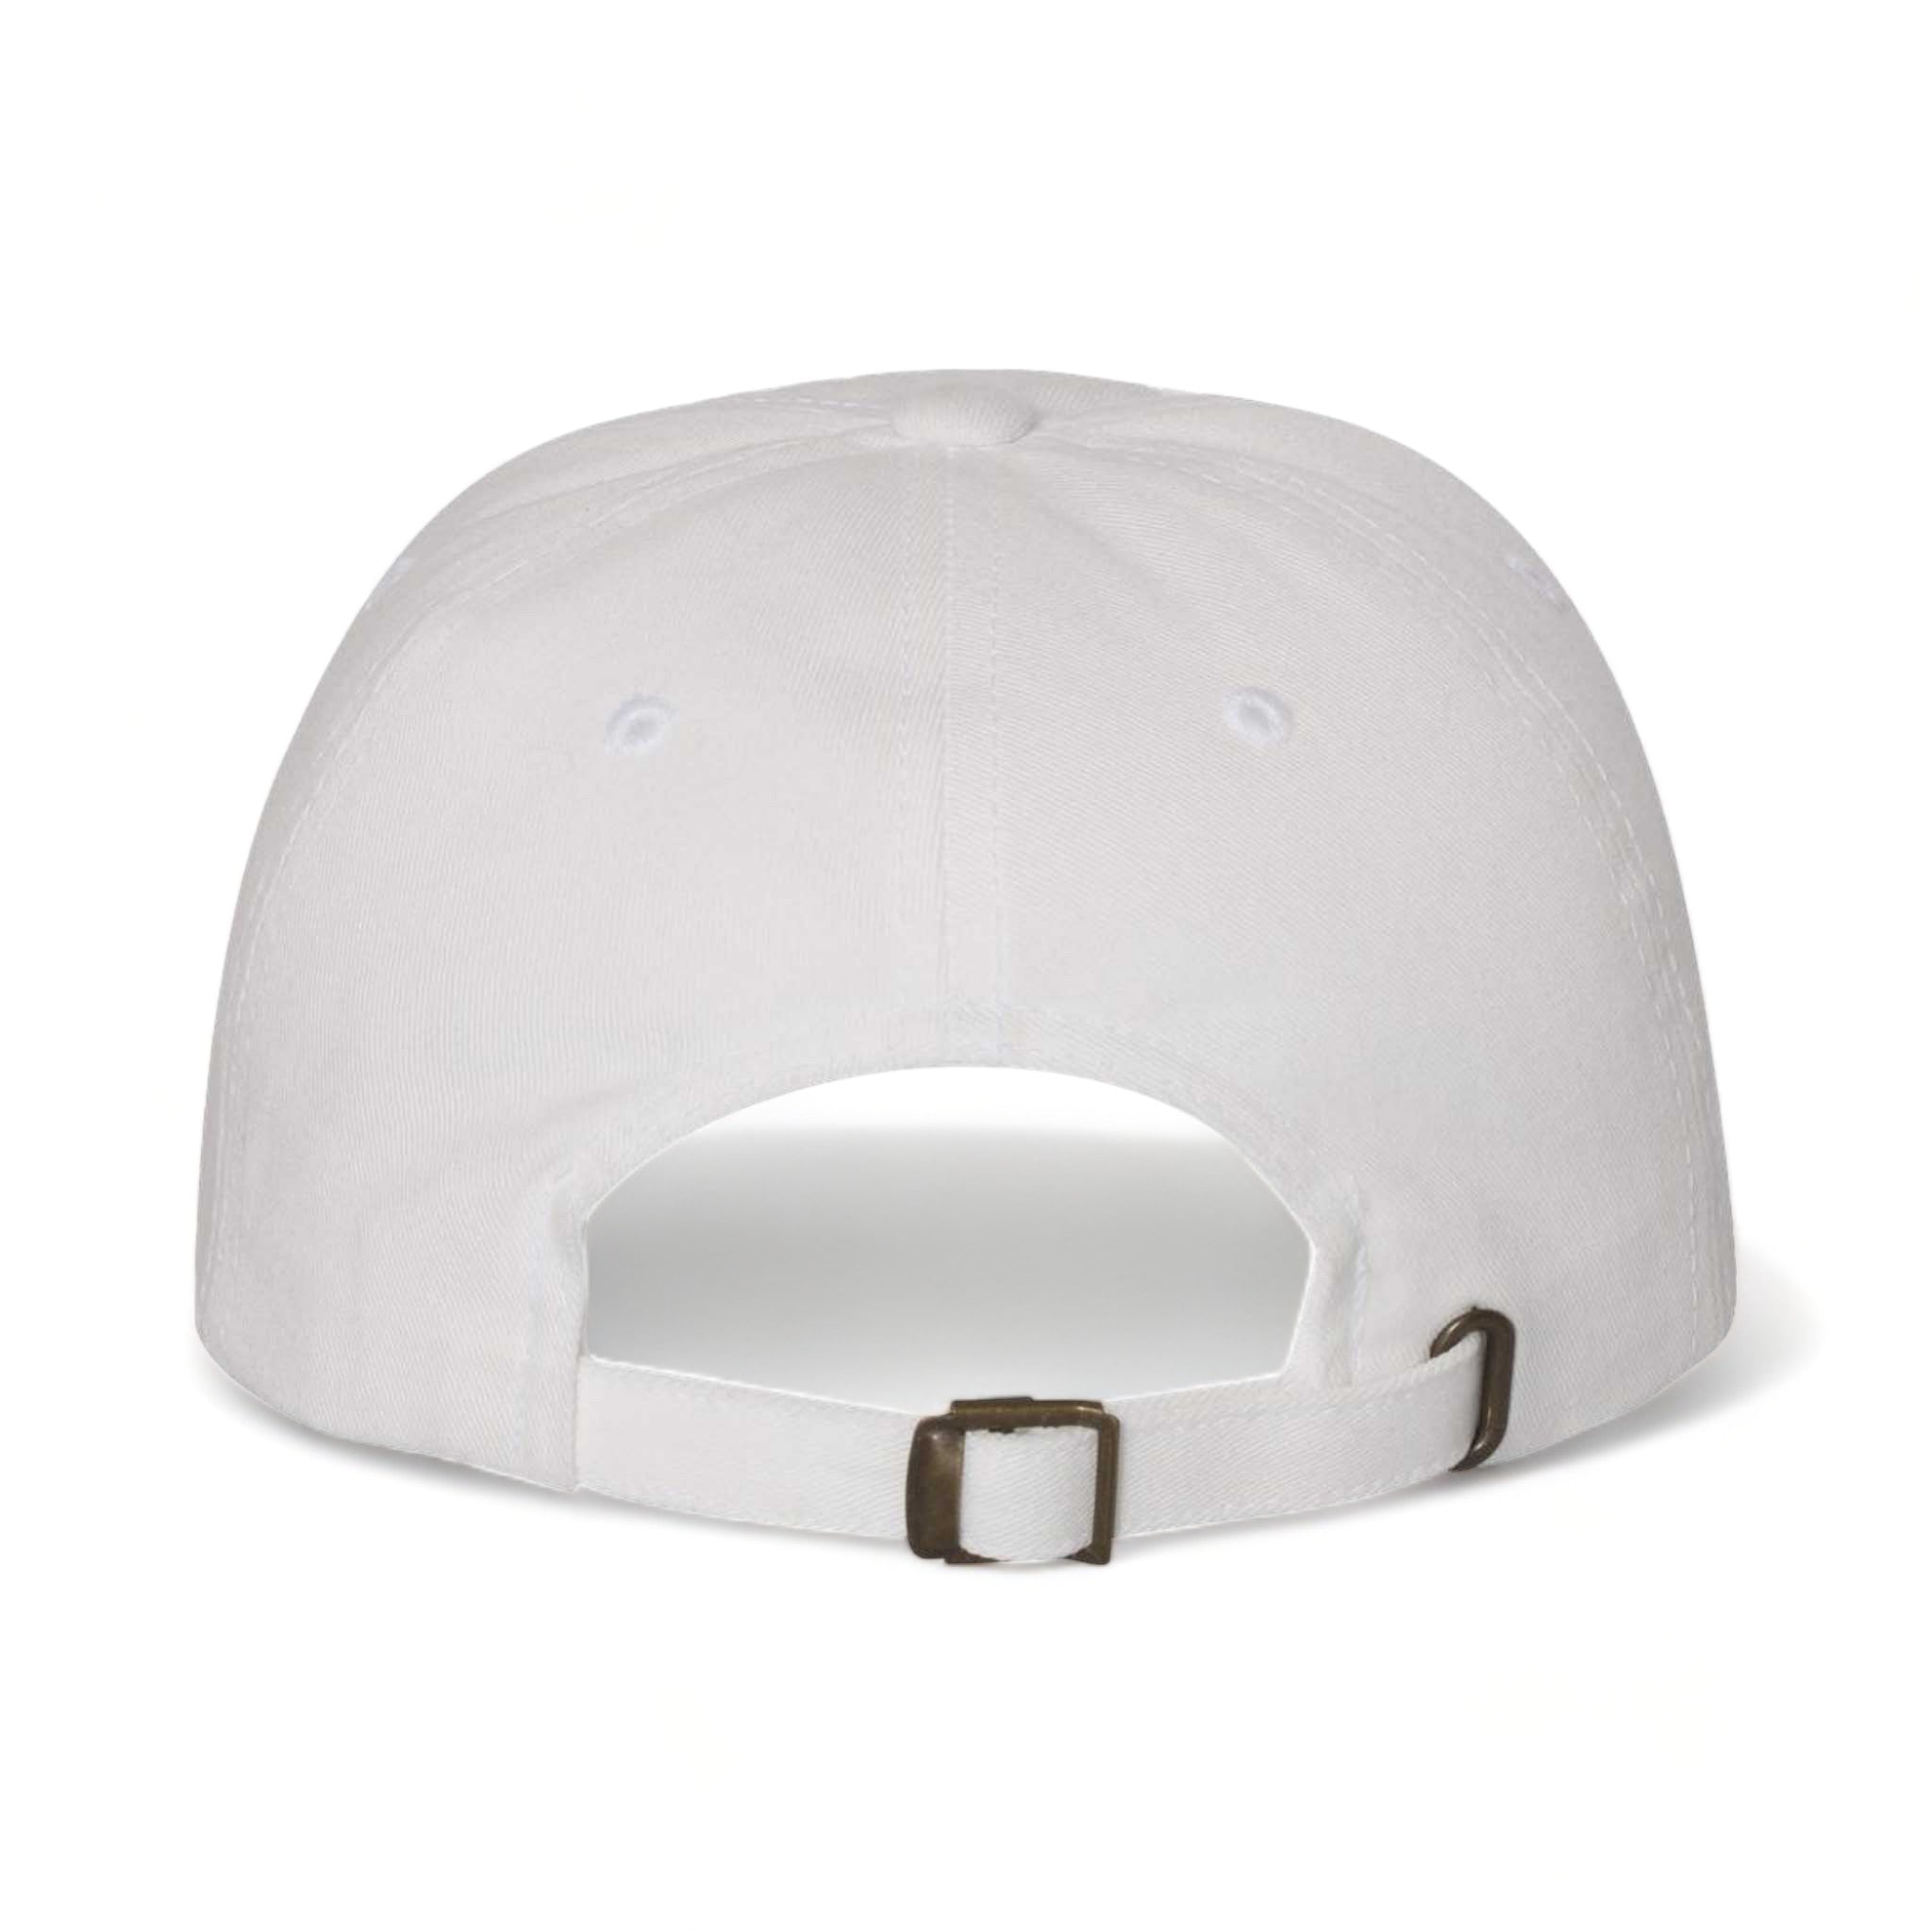 Back view of YP Classics 6245CM custom hat in white